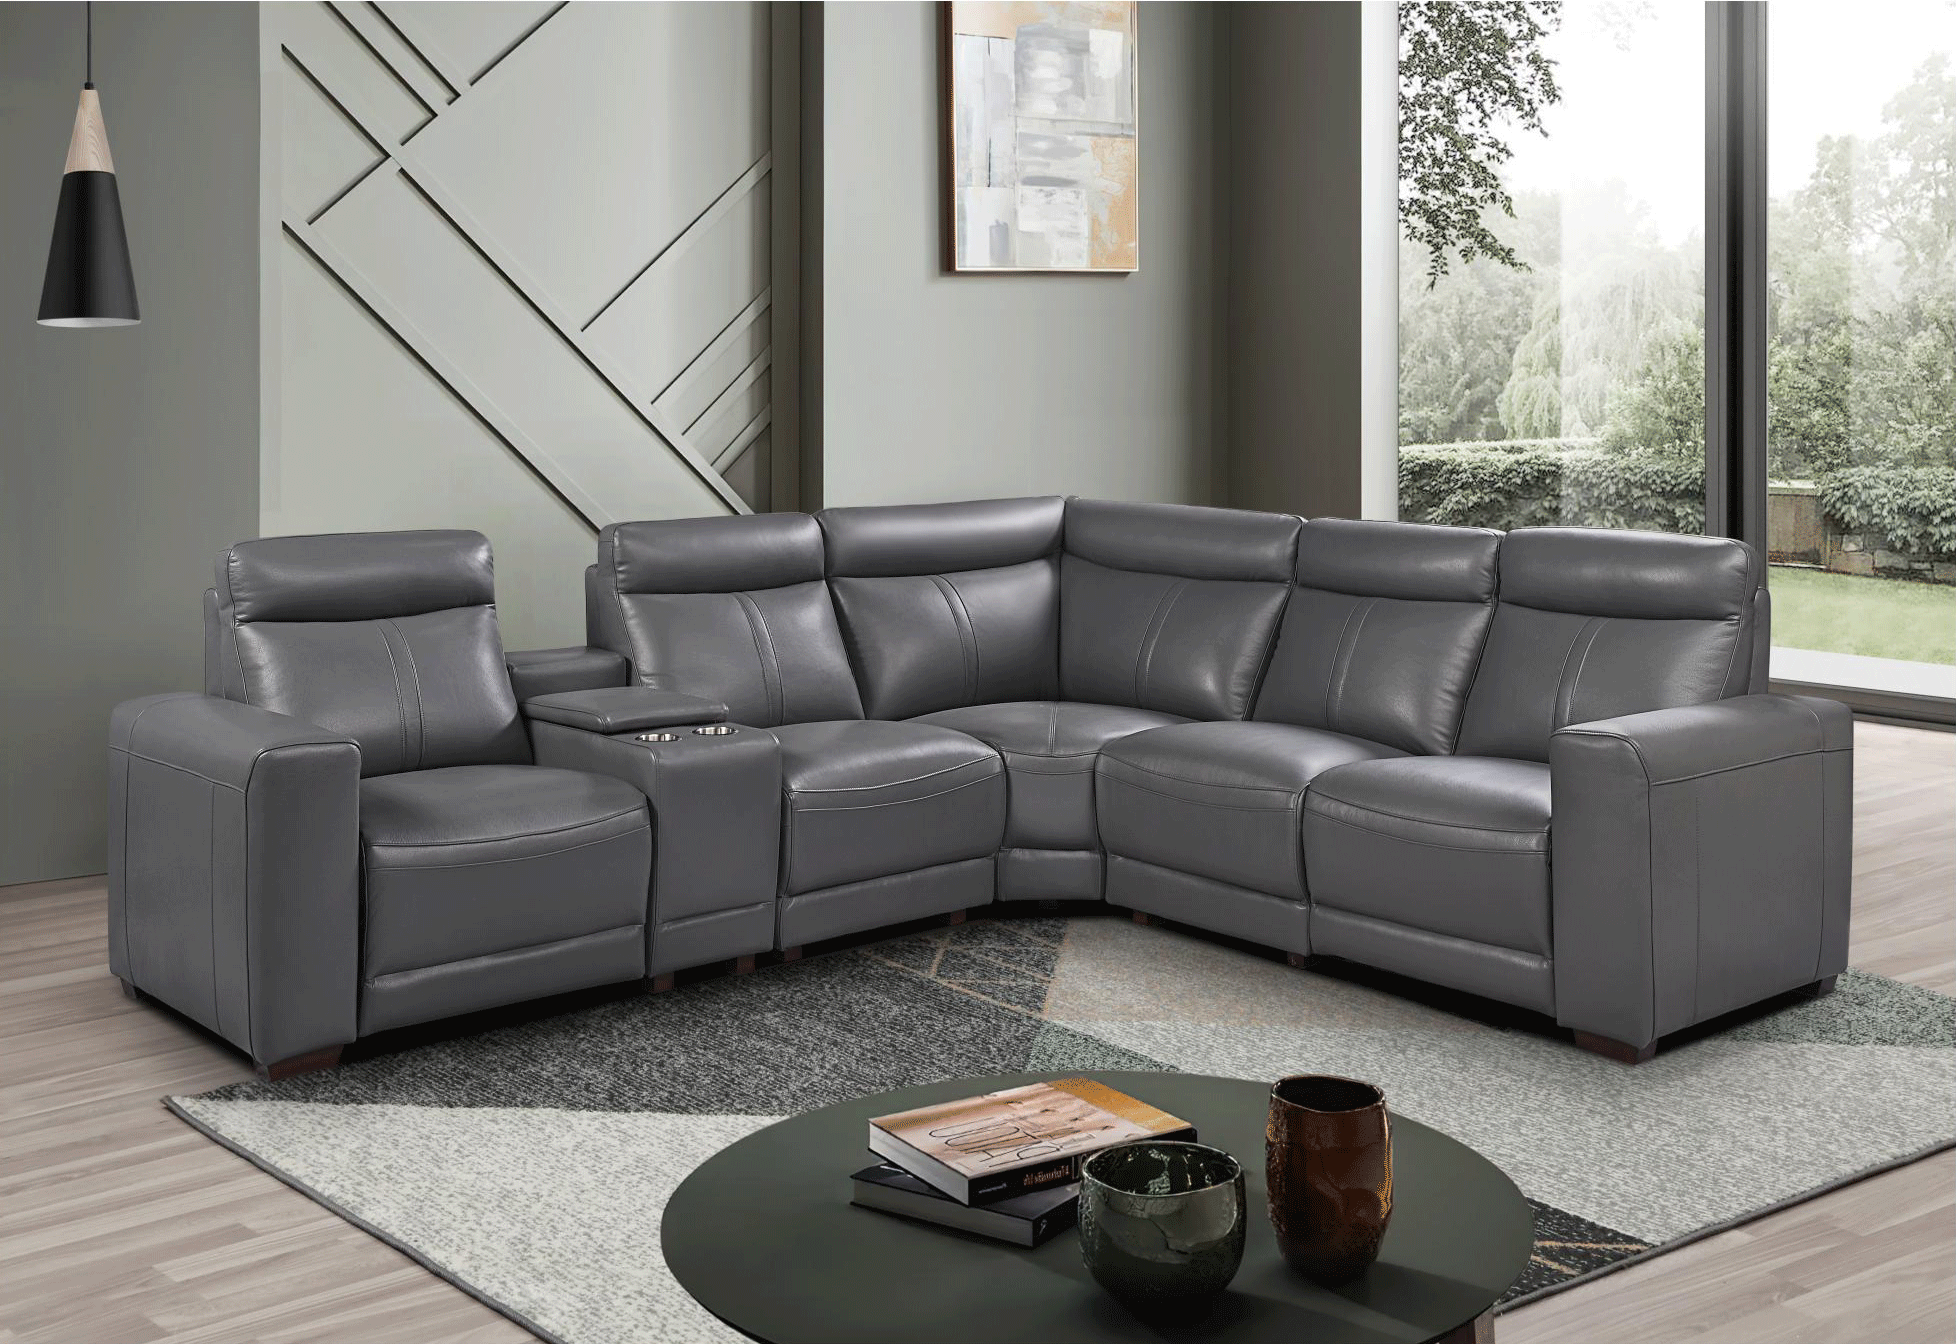 Brands FLR Modern Living Special Order 2777 Sectional w/ recliners